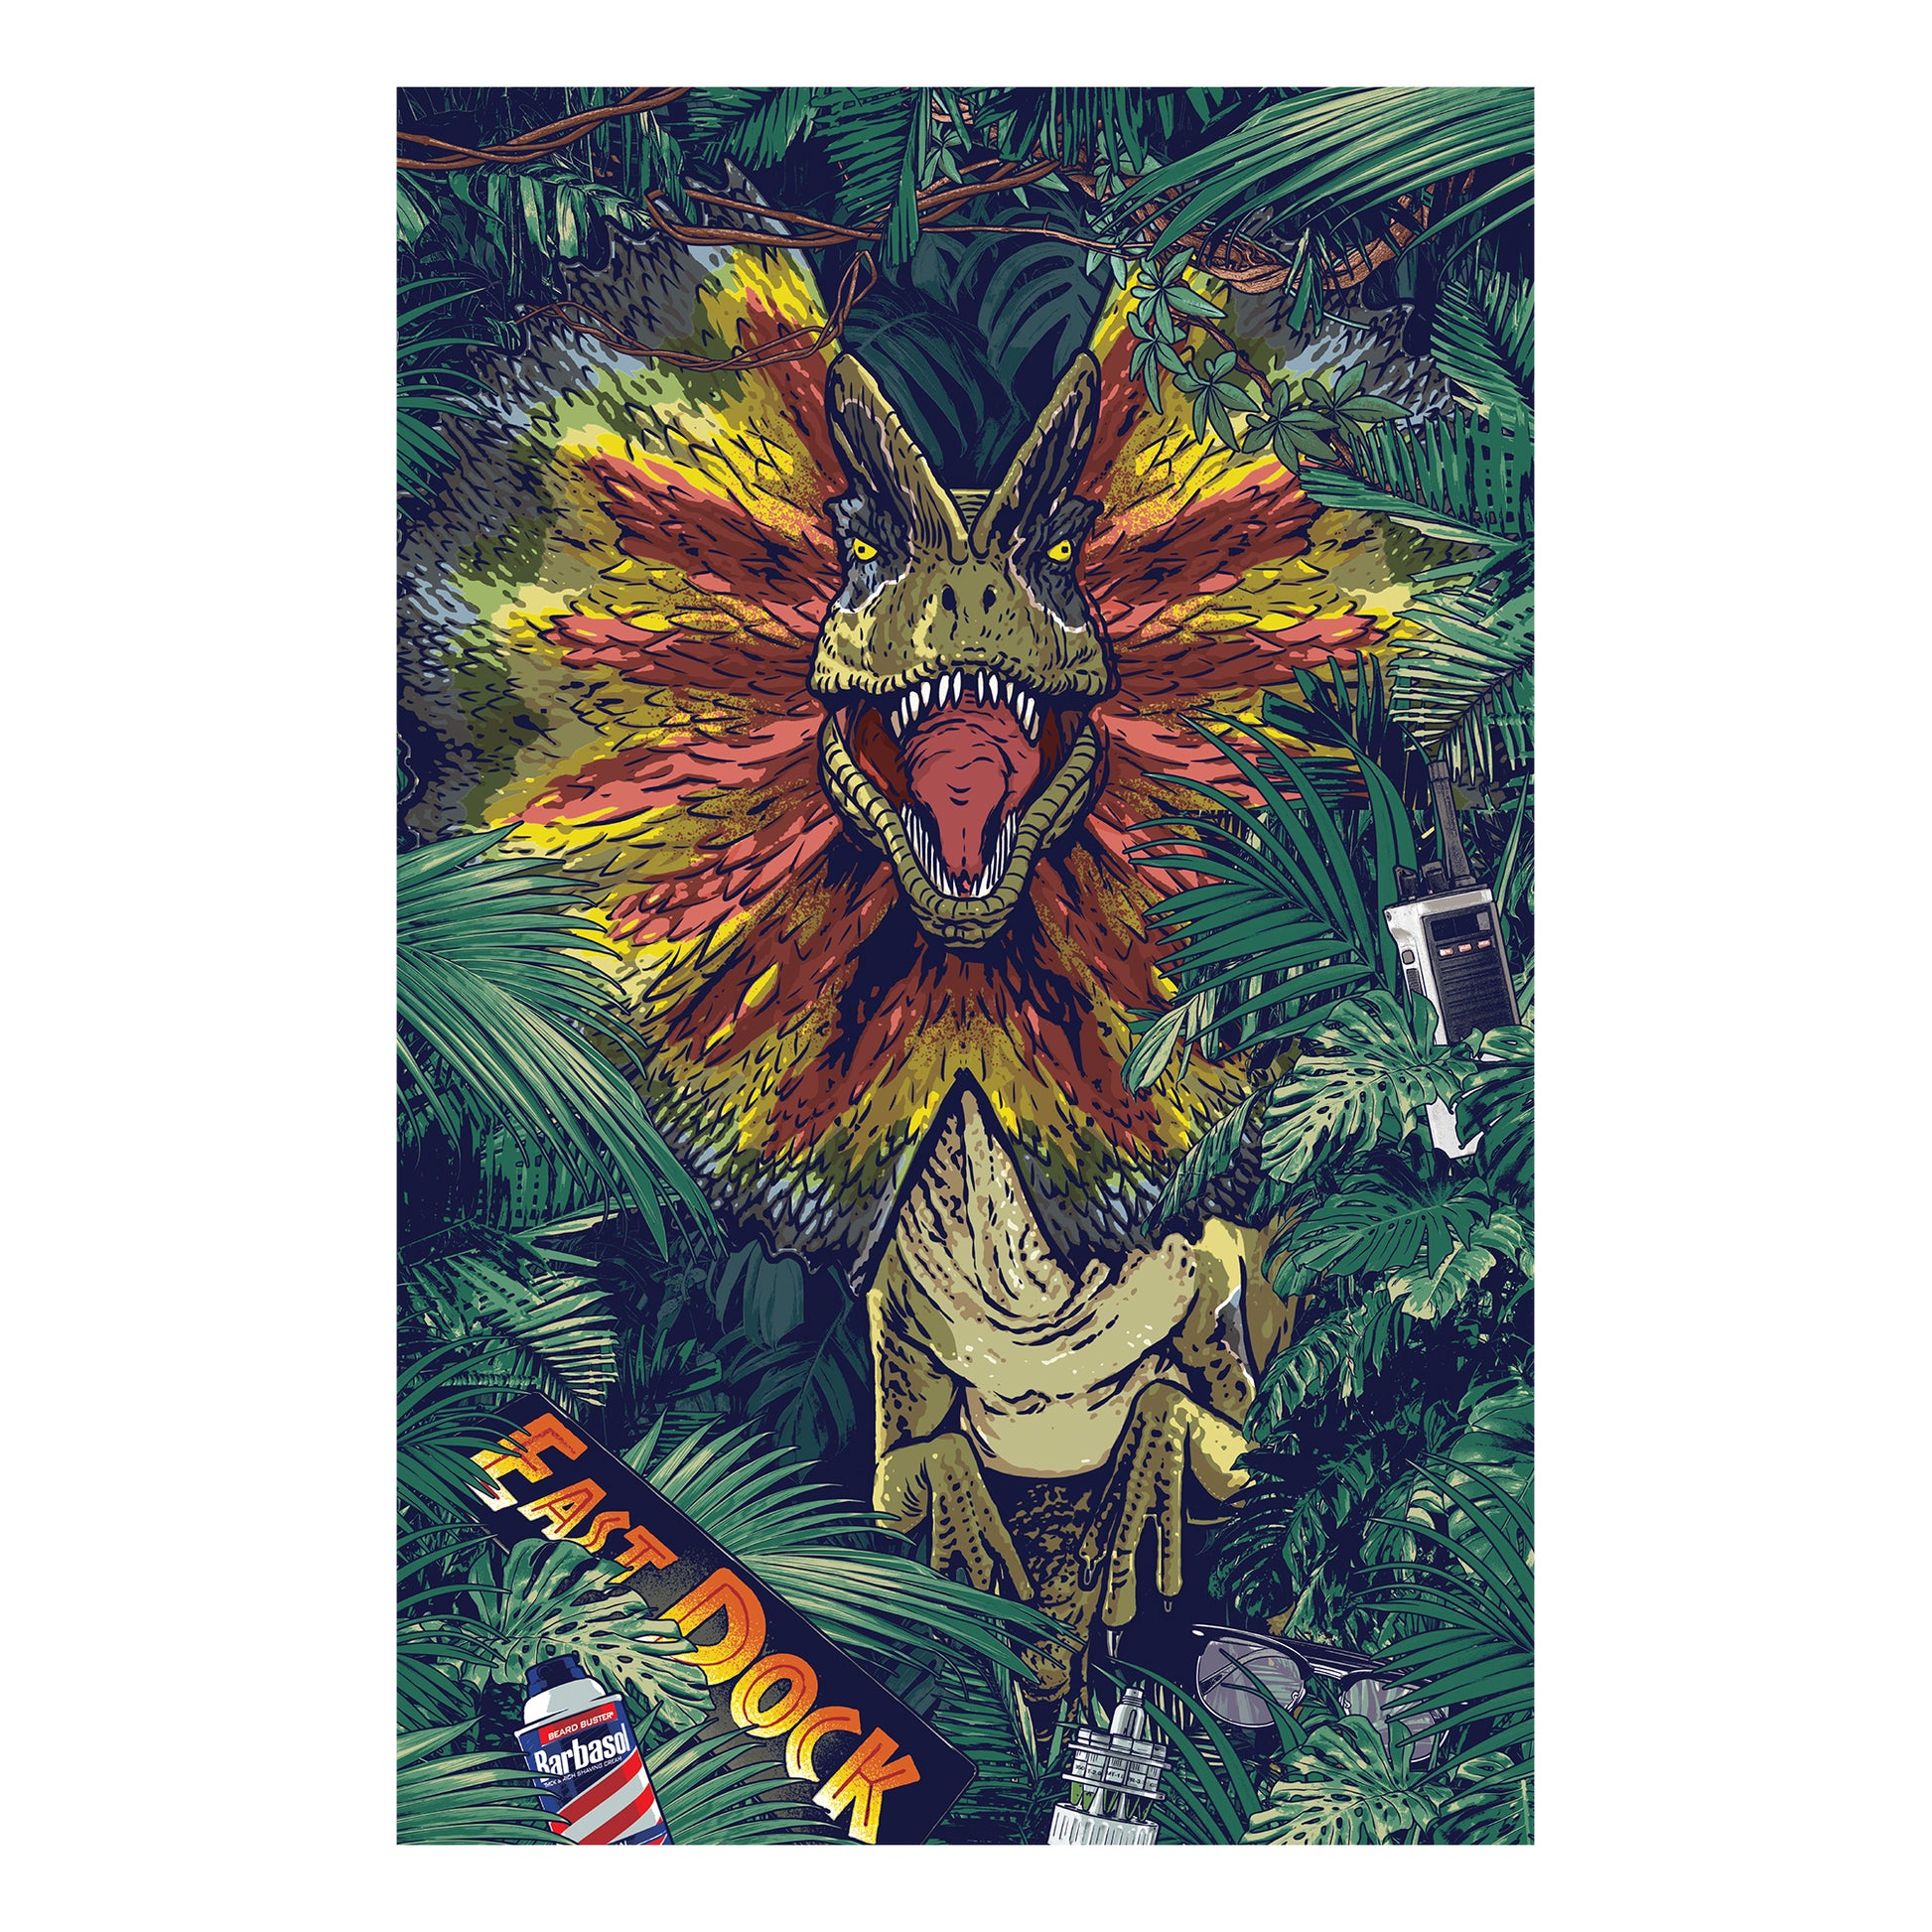 Jurassic Park: Dilophosaurus Mural - Officially Licensed NBC Universal Removable Adhesive Decal - Fathead | Small (11W x 17H) | Premium Wall Decals